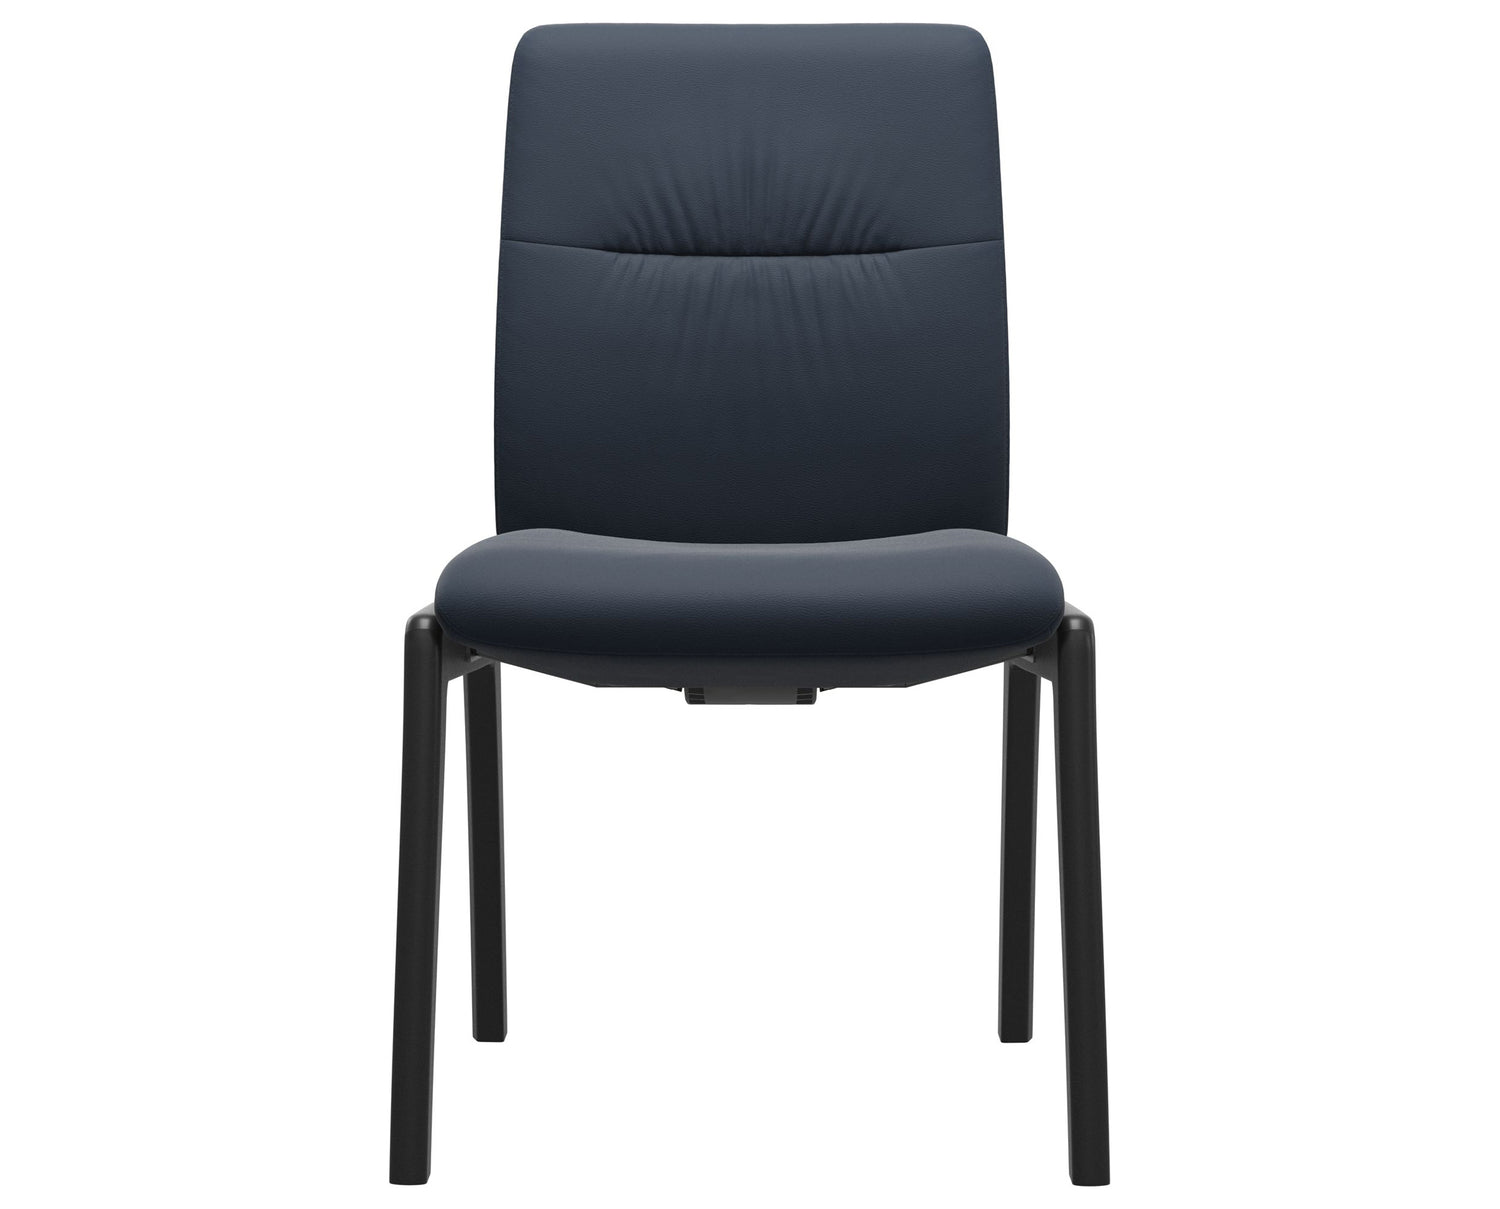 Paloma Leather Oxford Blue & Black Base | Stressless Mint Low Back D100 Dining Chair | Valley Ridge Furniture